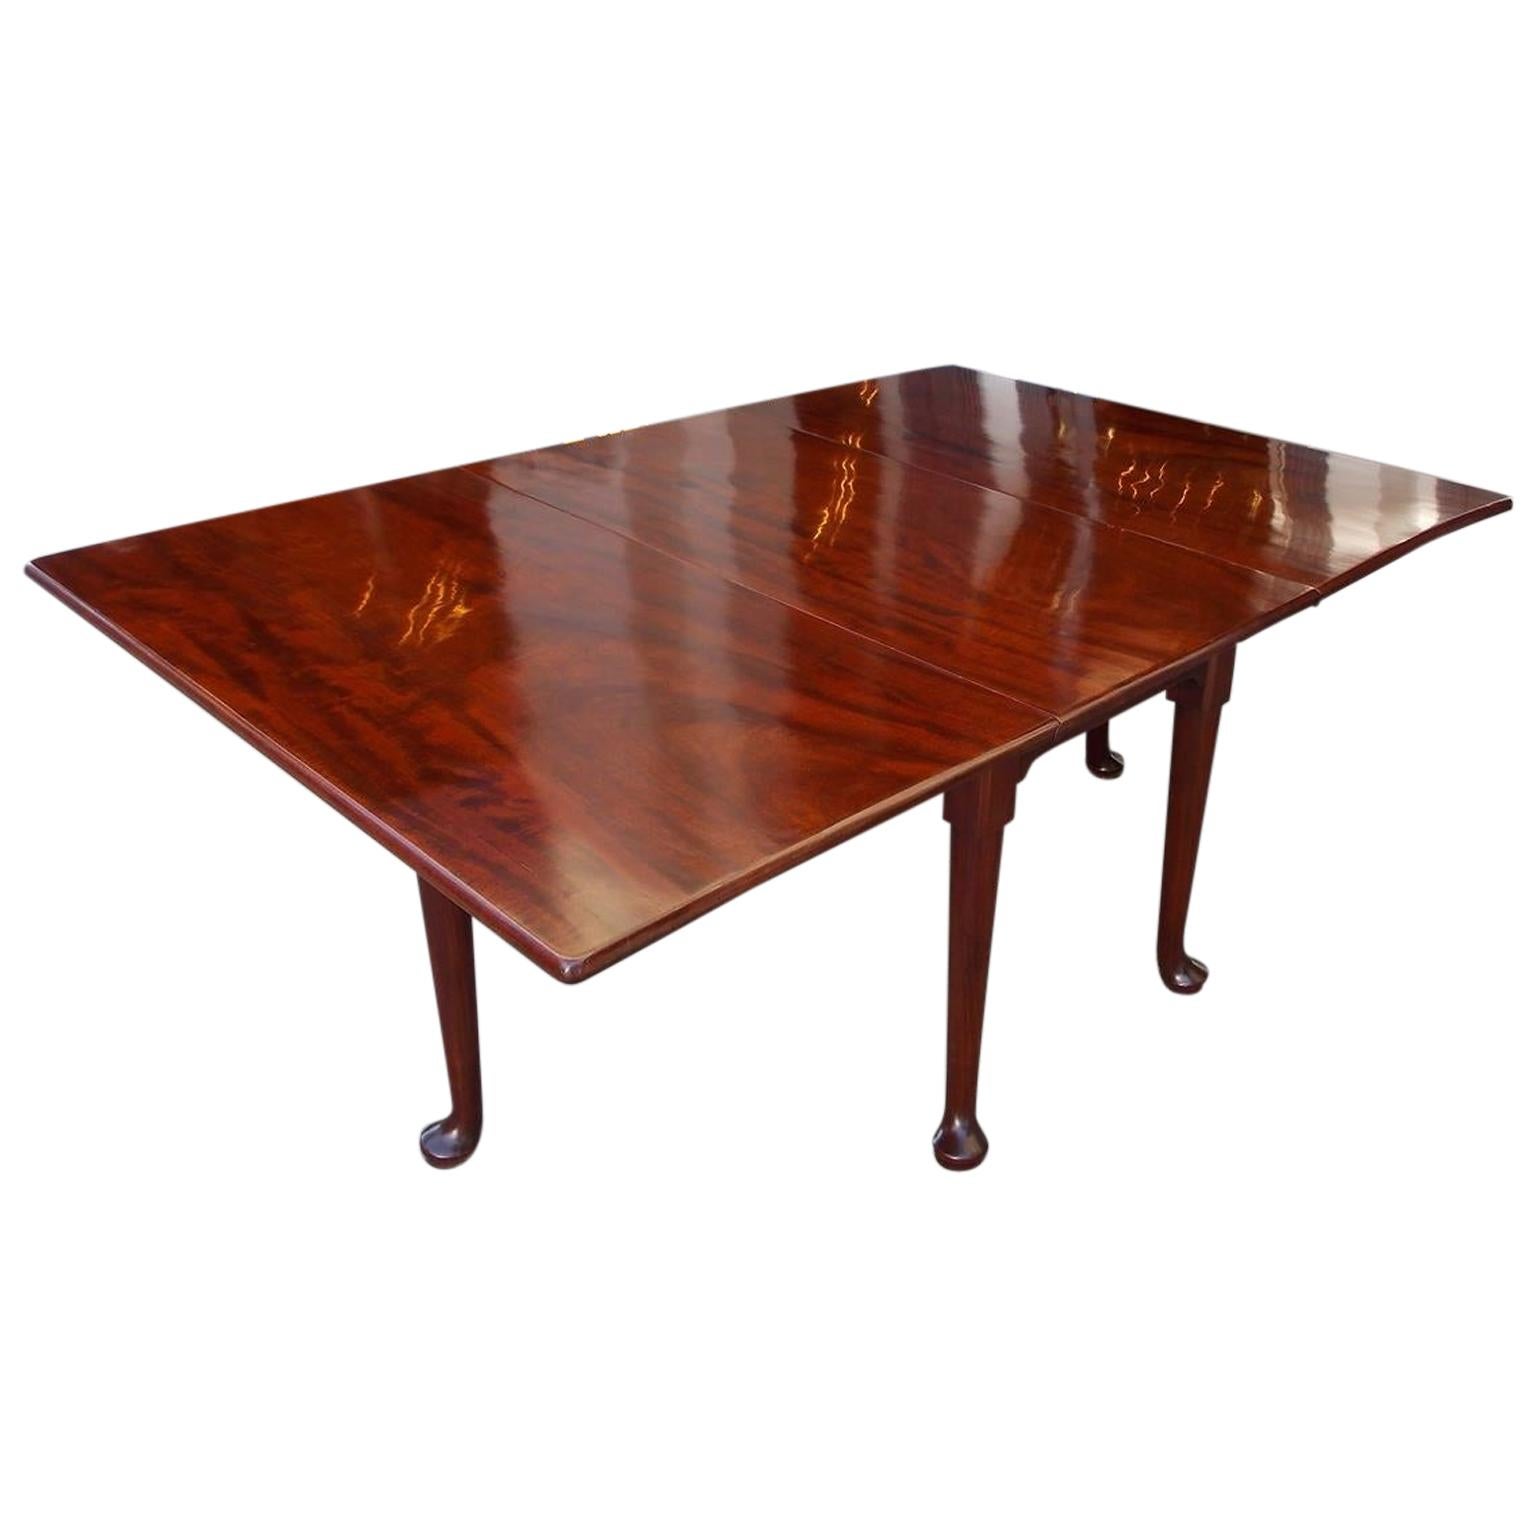 English Queen Anne Cuban Mahogany Drop Leaf Dining Table with Pad Feet, C. 1730